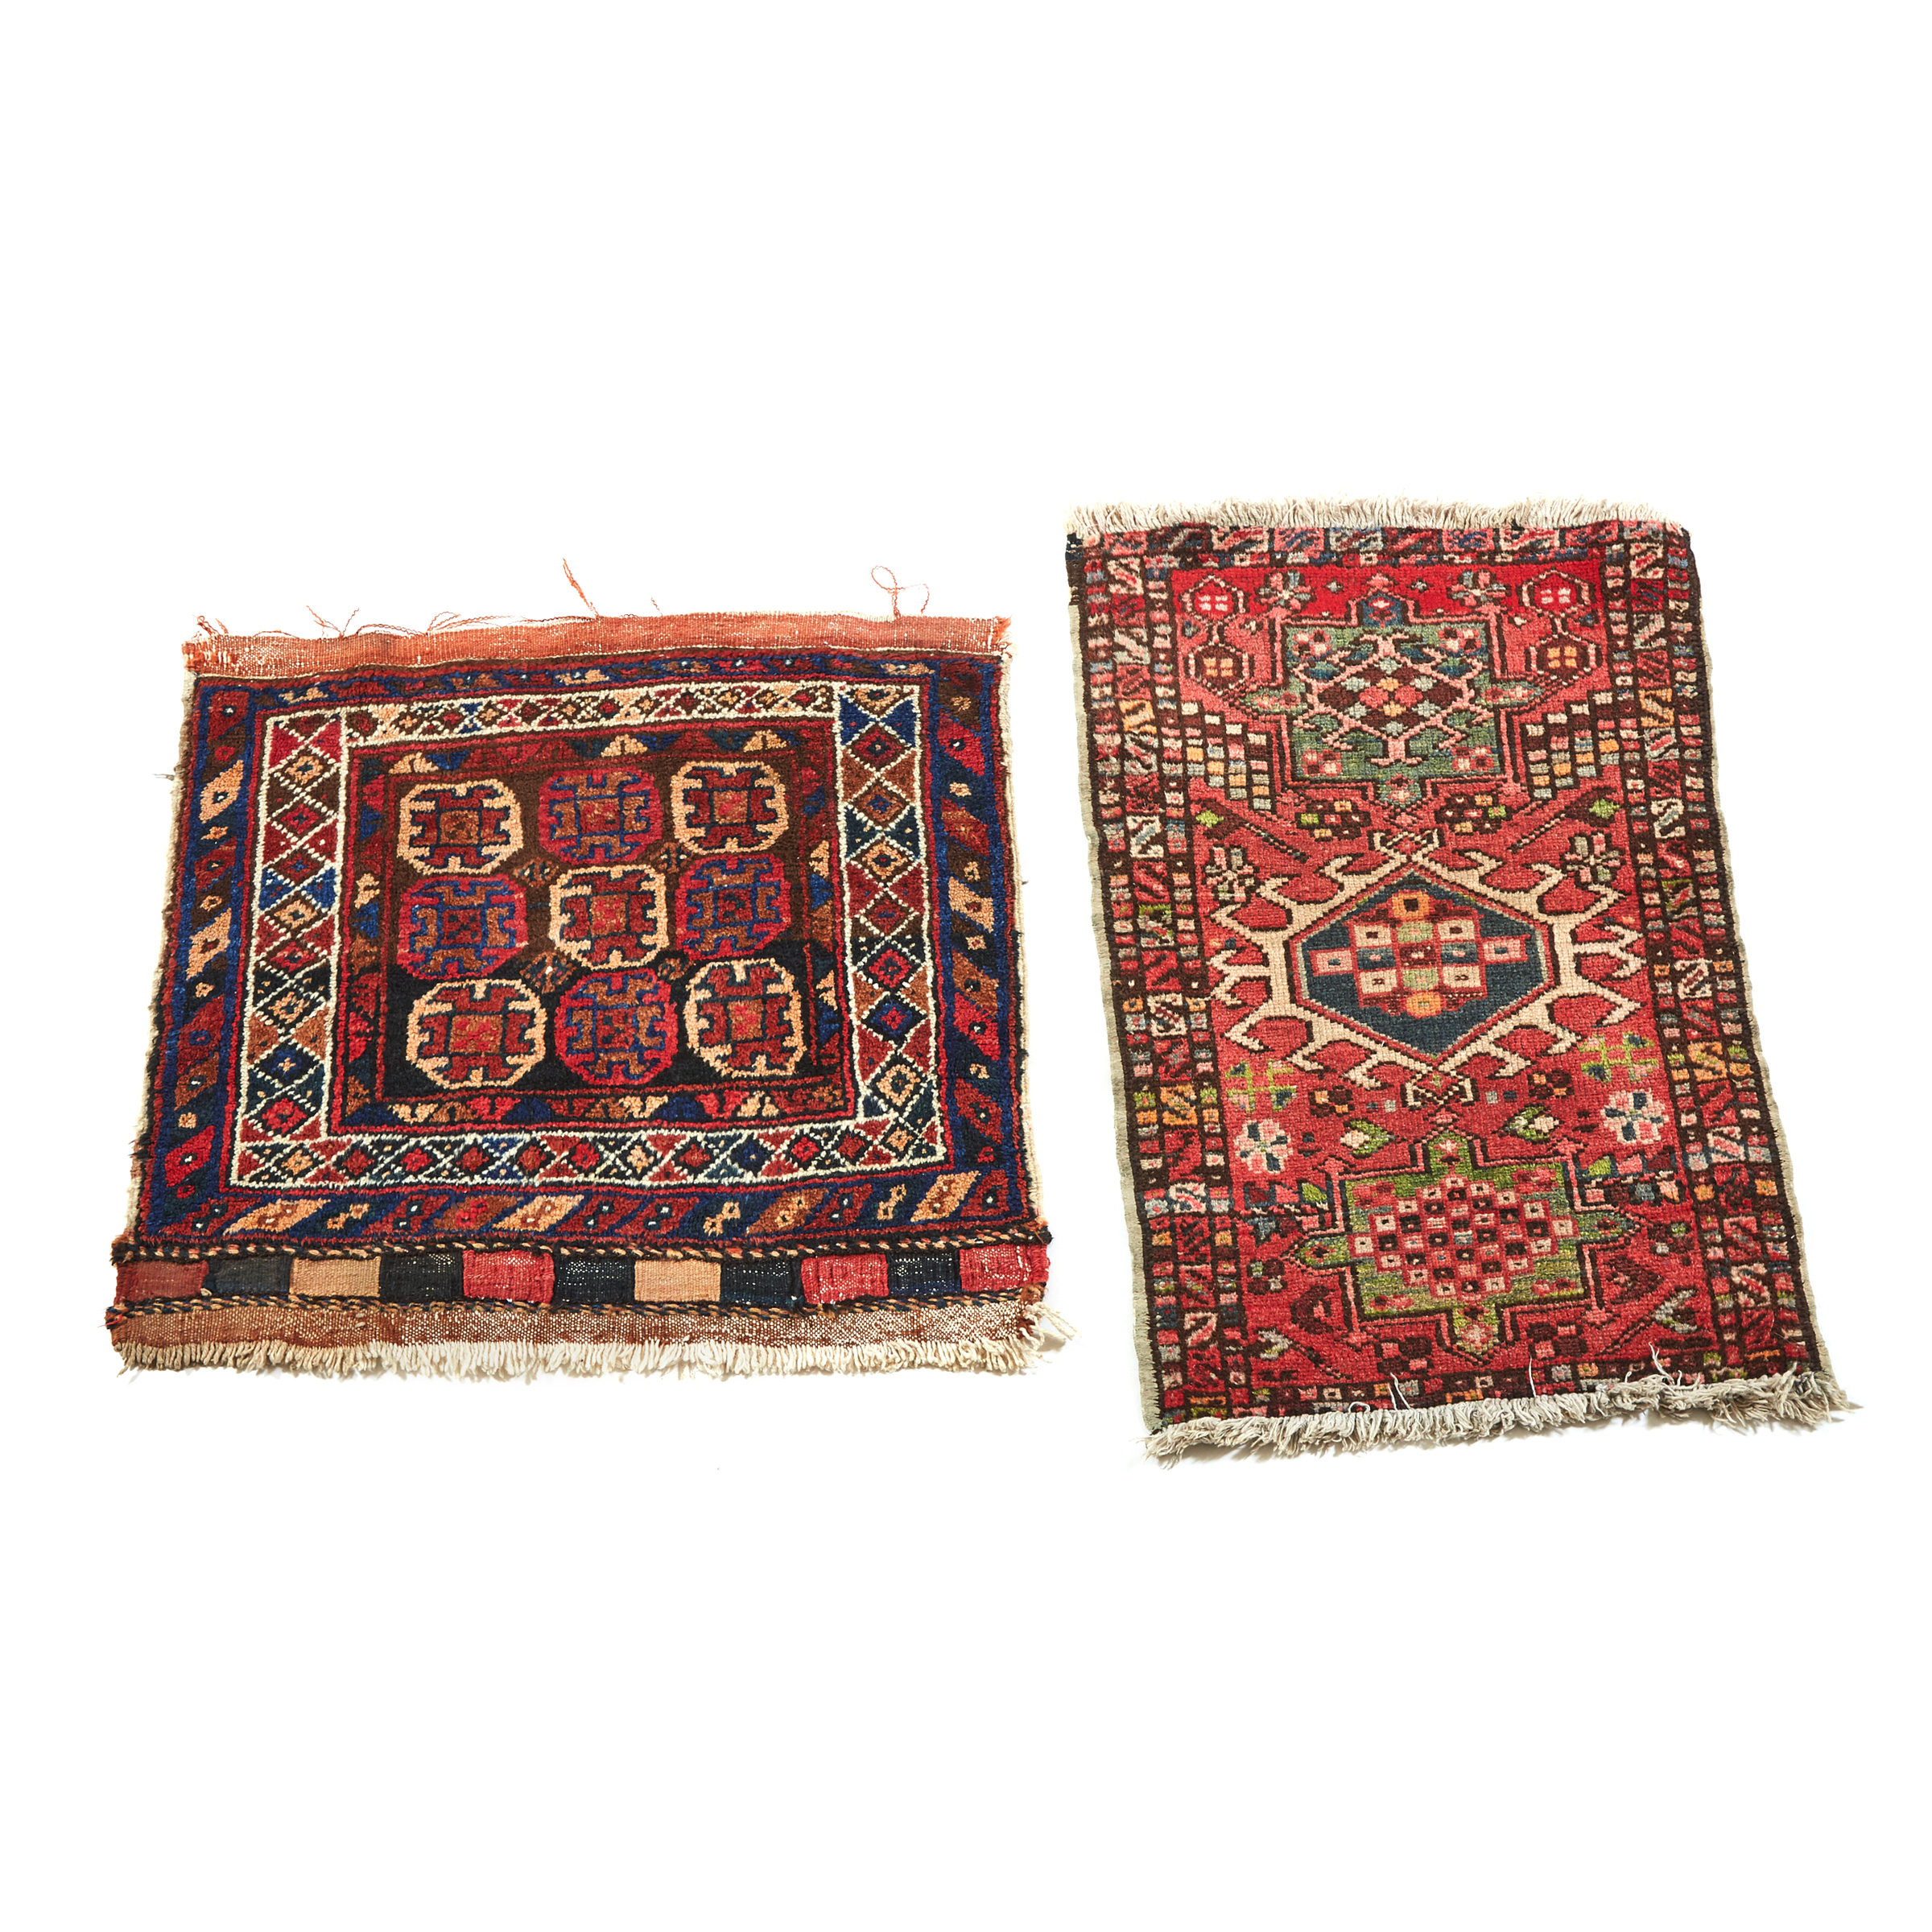 Karadge Mat, Persian togeher with a Turkish Mat, both mid 20th century